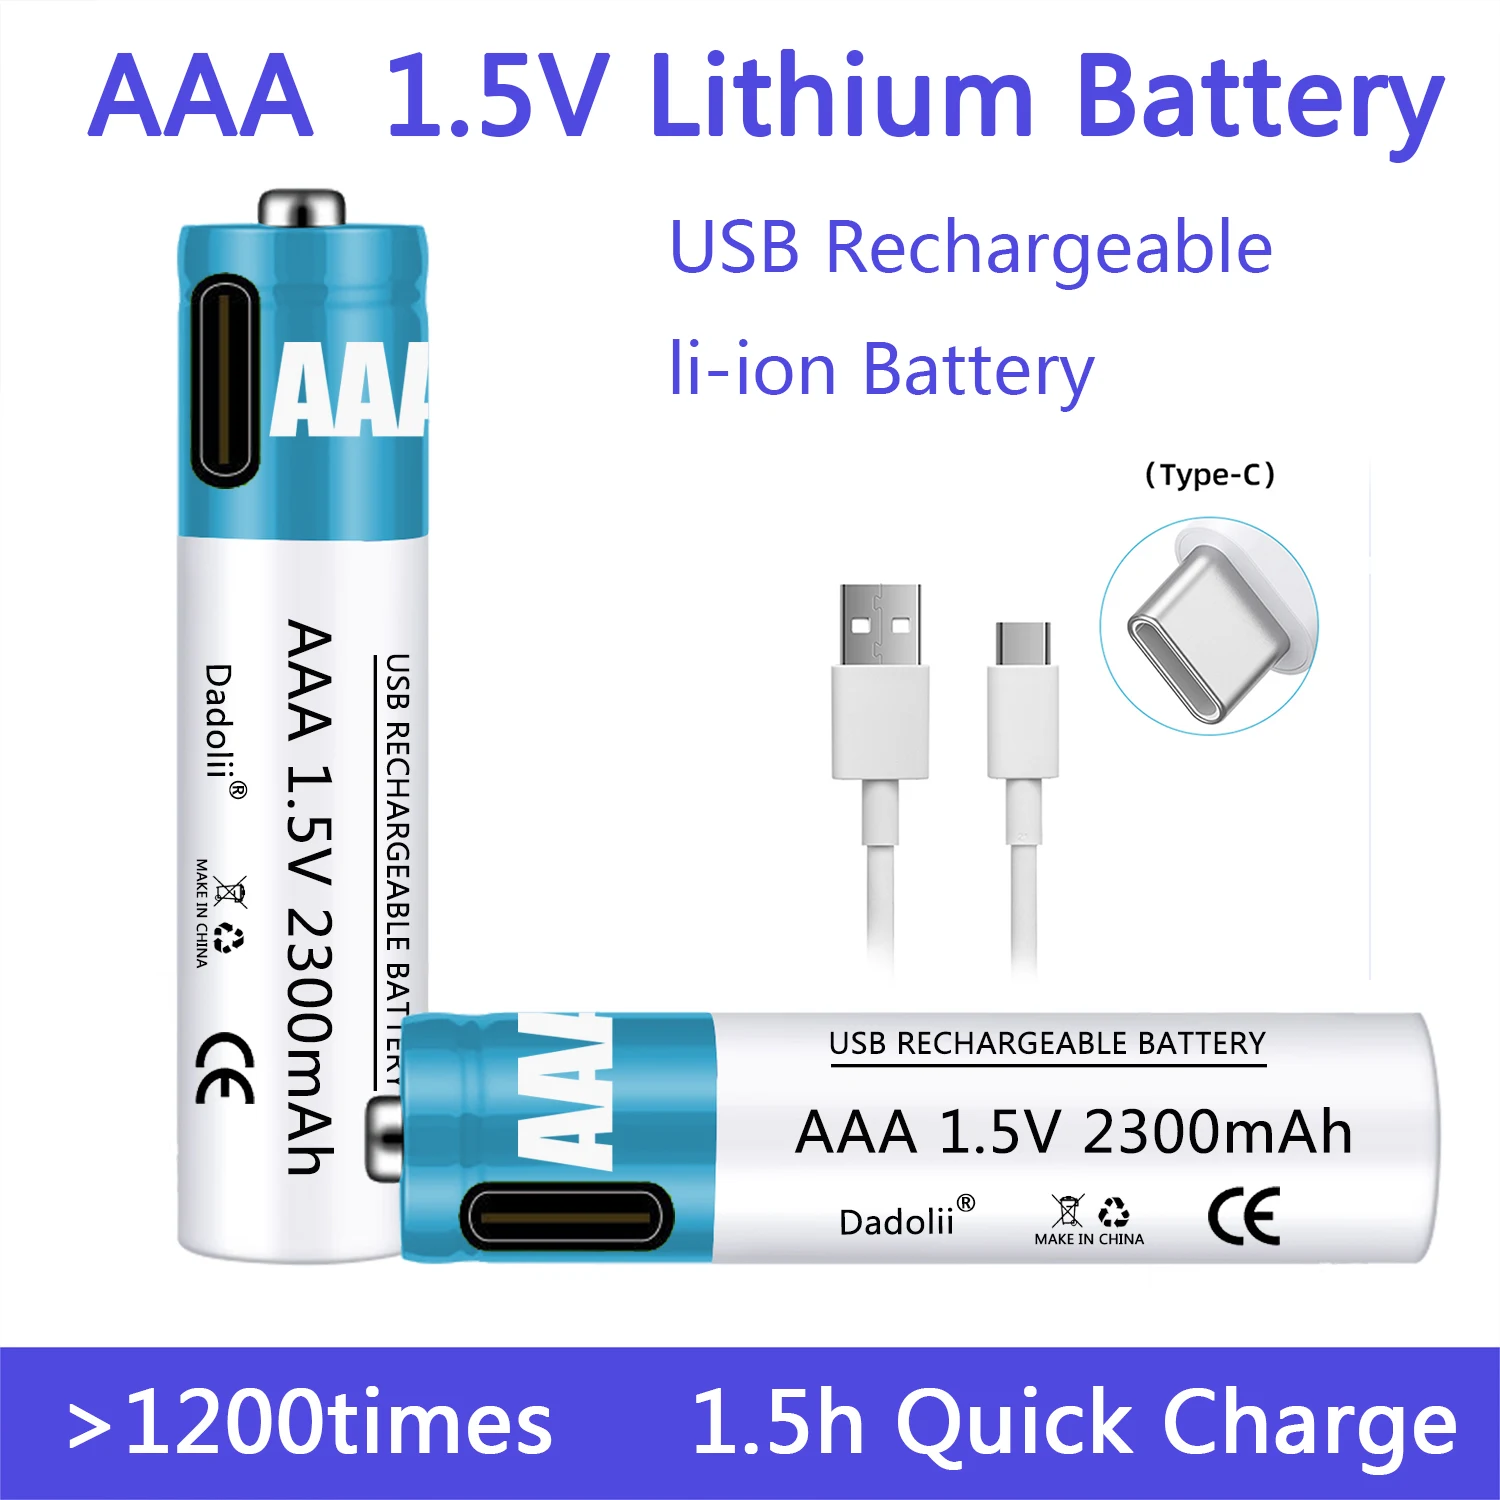 

New 1.5V AAA Rechargeable Battery 2300mAh Rechargeable AAA Battery Lithium Polymer Battery Quick Charging by Type-C USB Cable